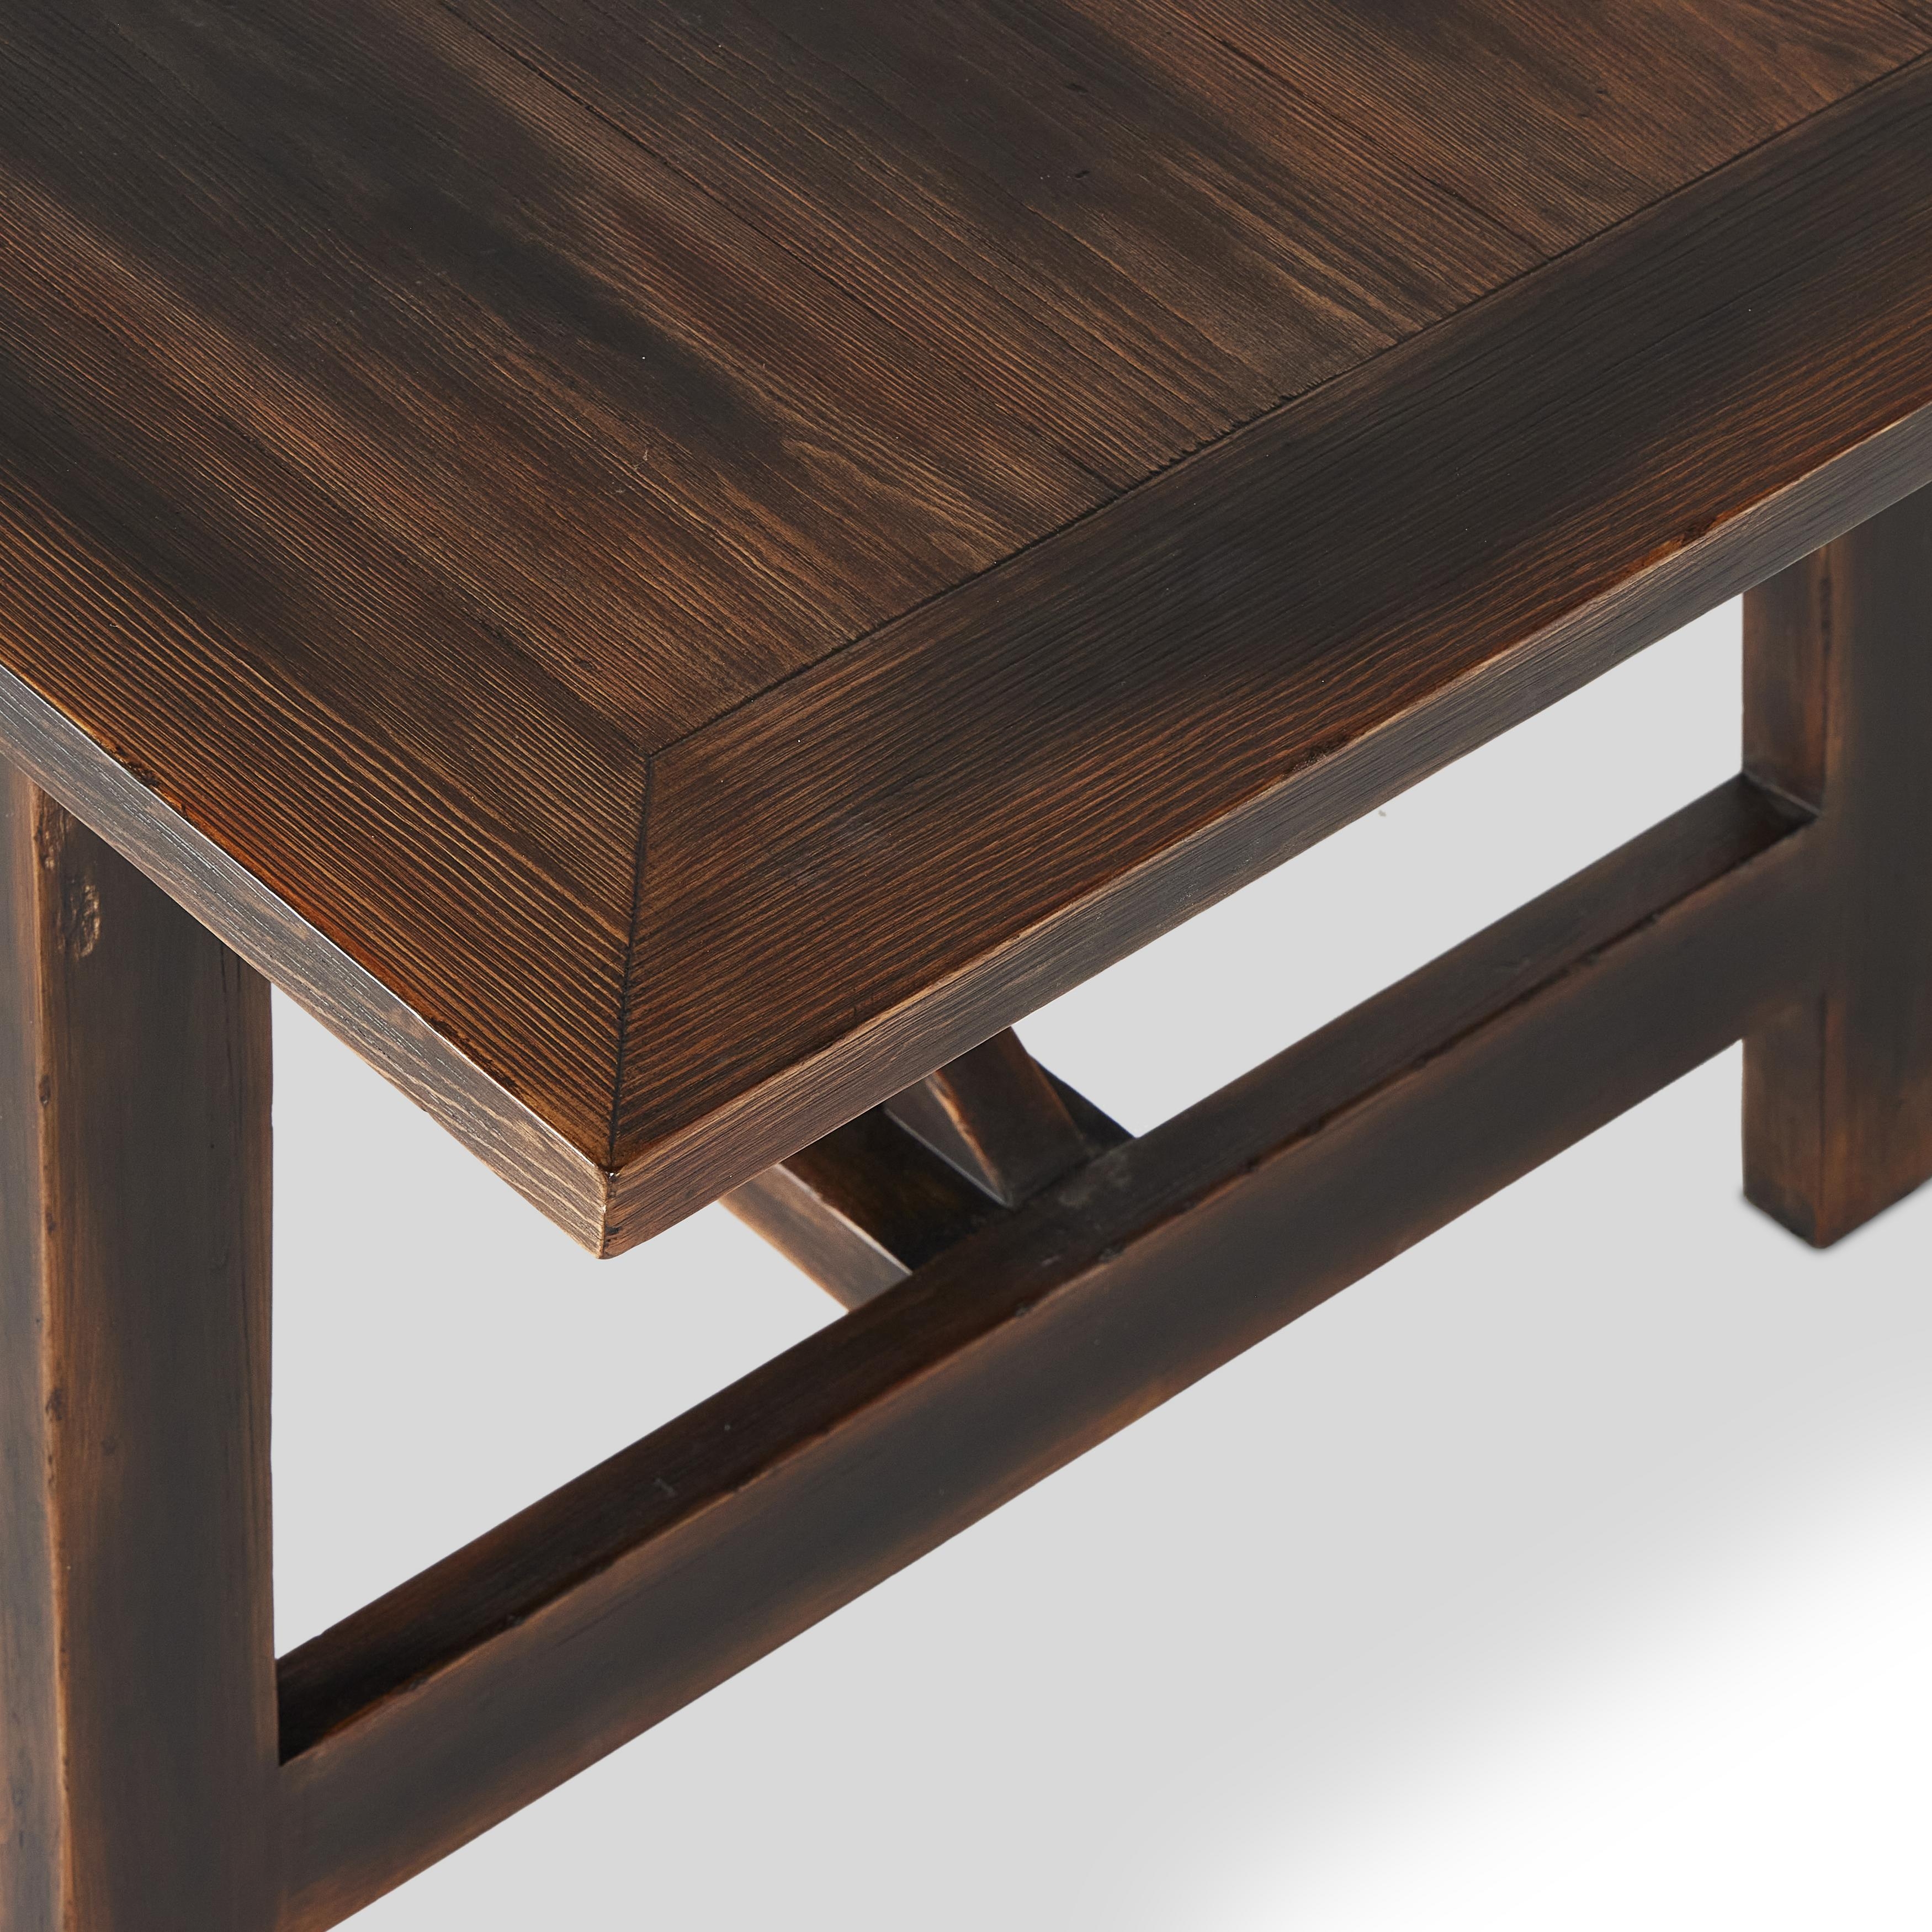 The 1500 Kilometer Dining Table-Agd Brwn - Image 7